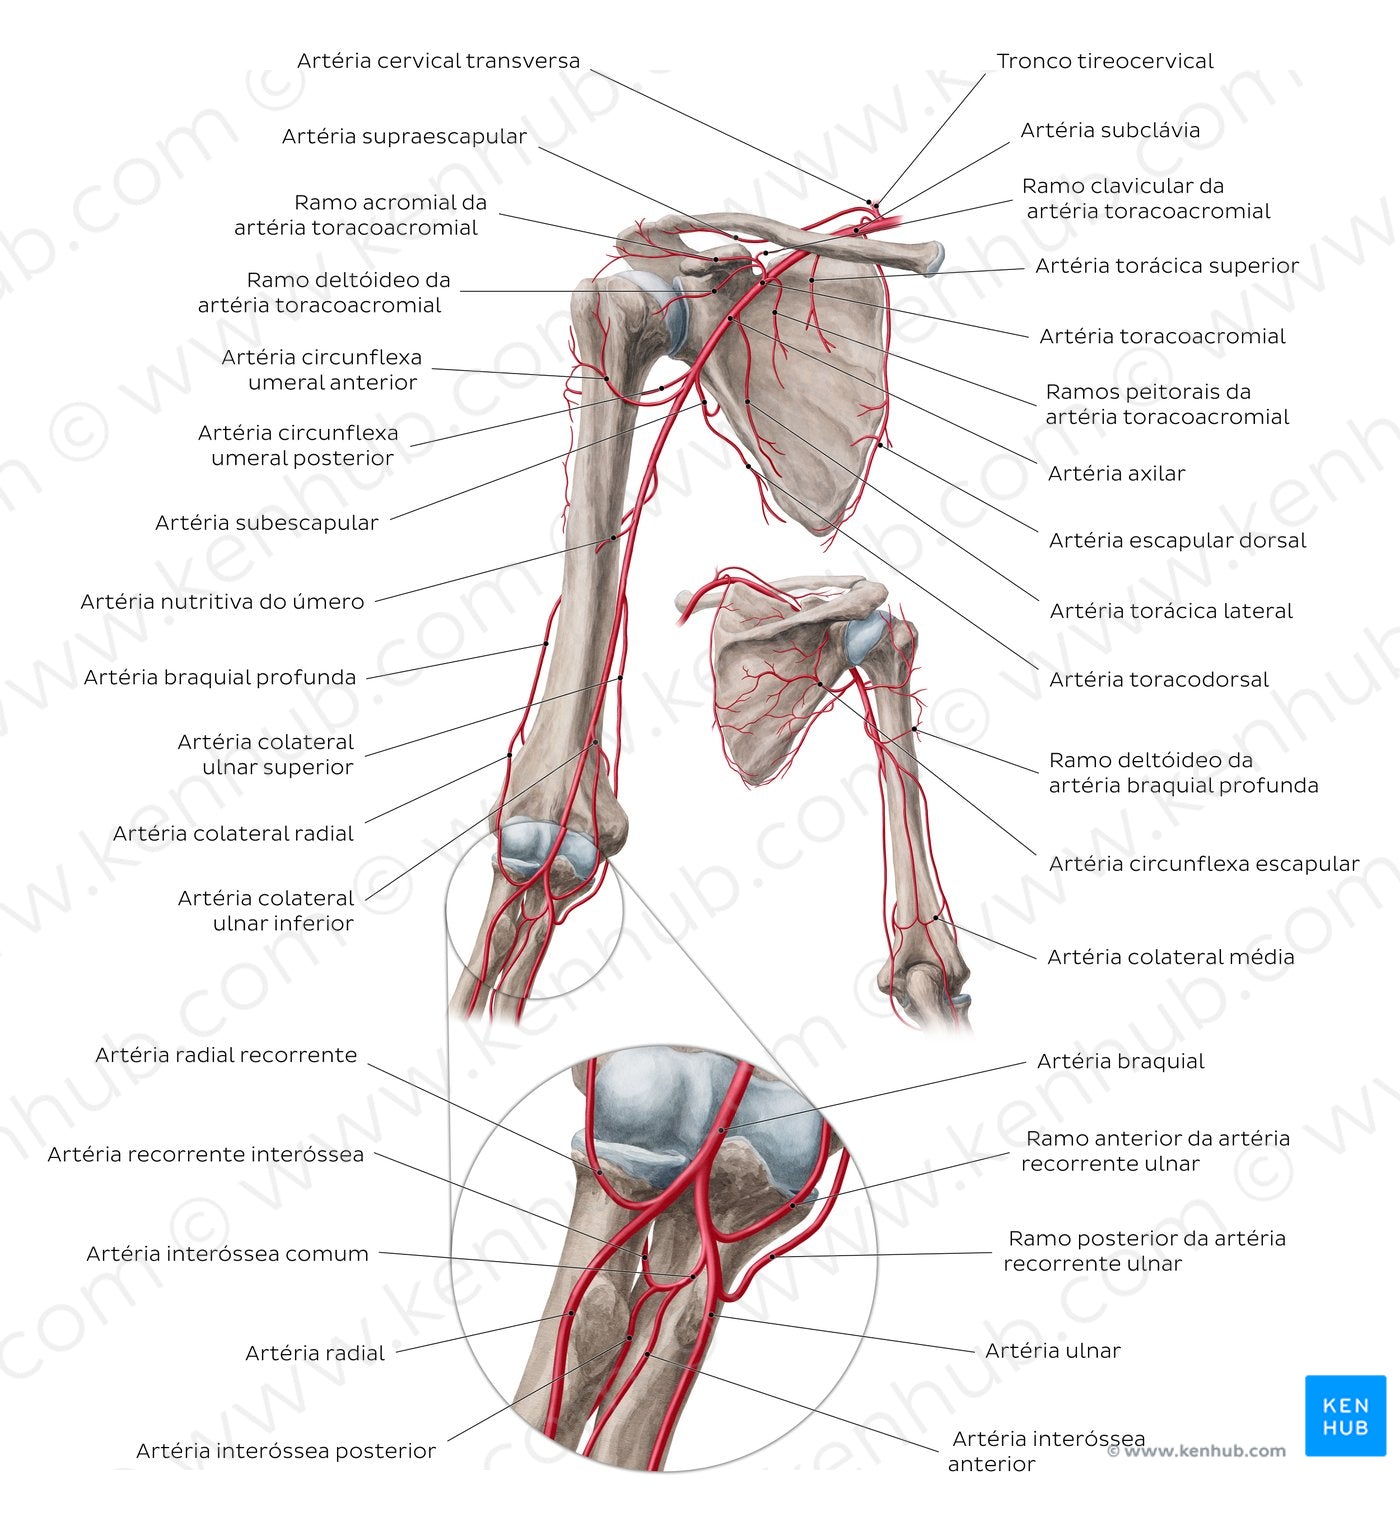 Brachial artery and its branches (Portuguese)